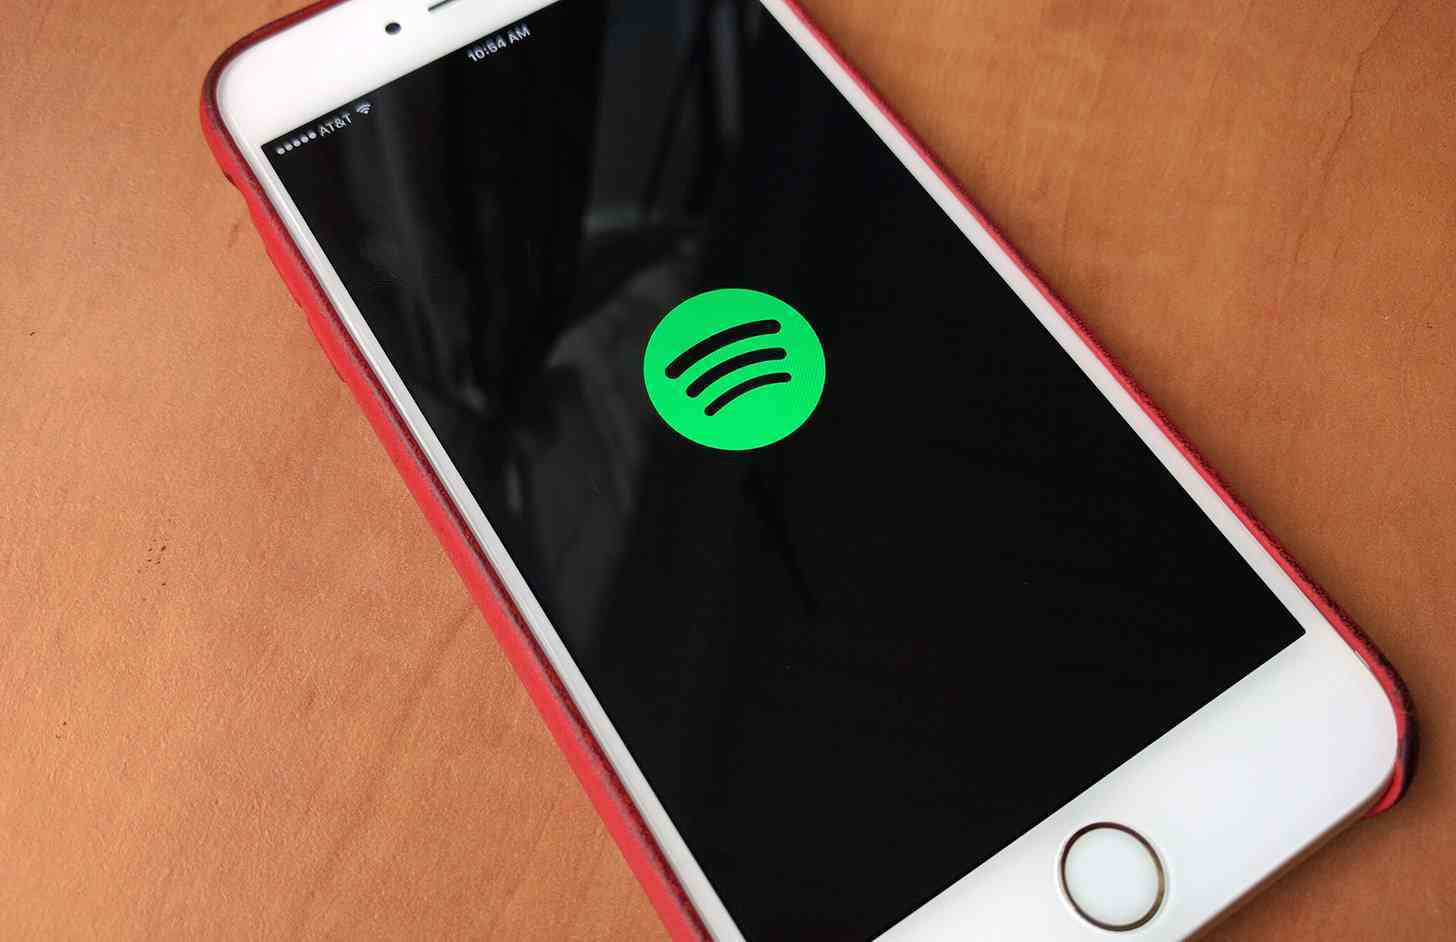 Spotify on an iPhone